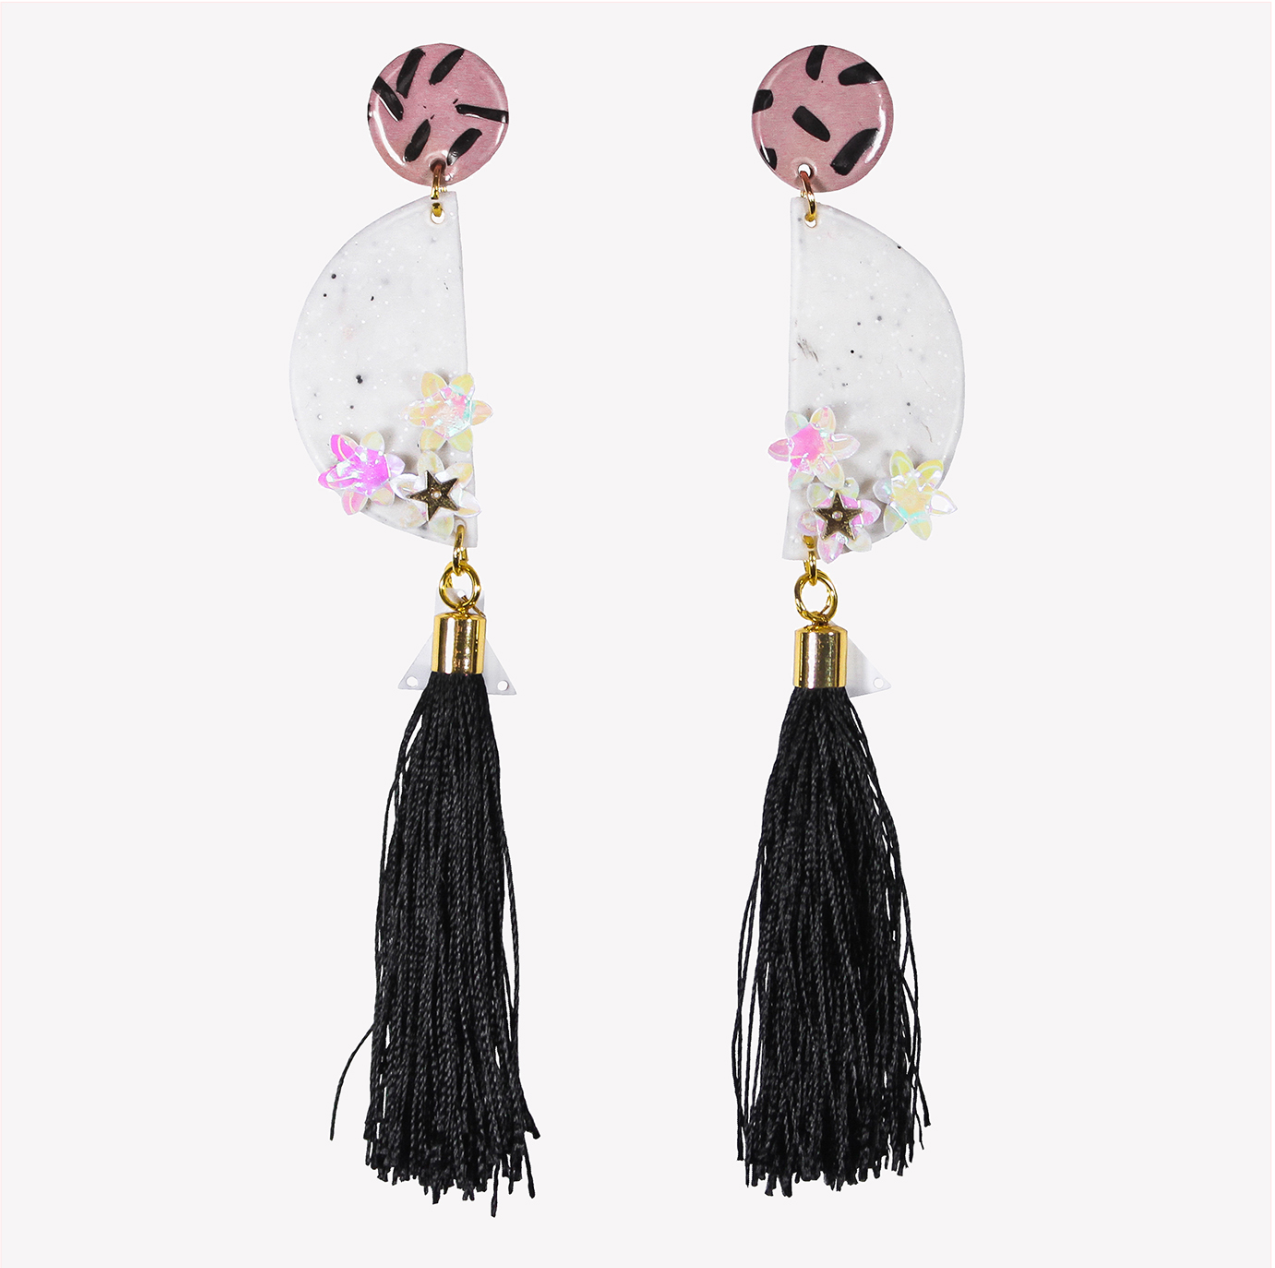 Long half circle earrings with black tassels and sequins